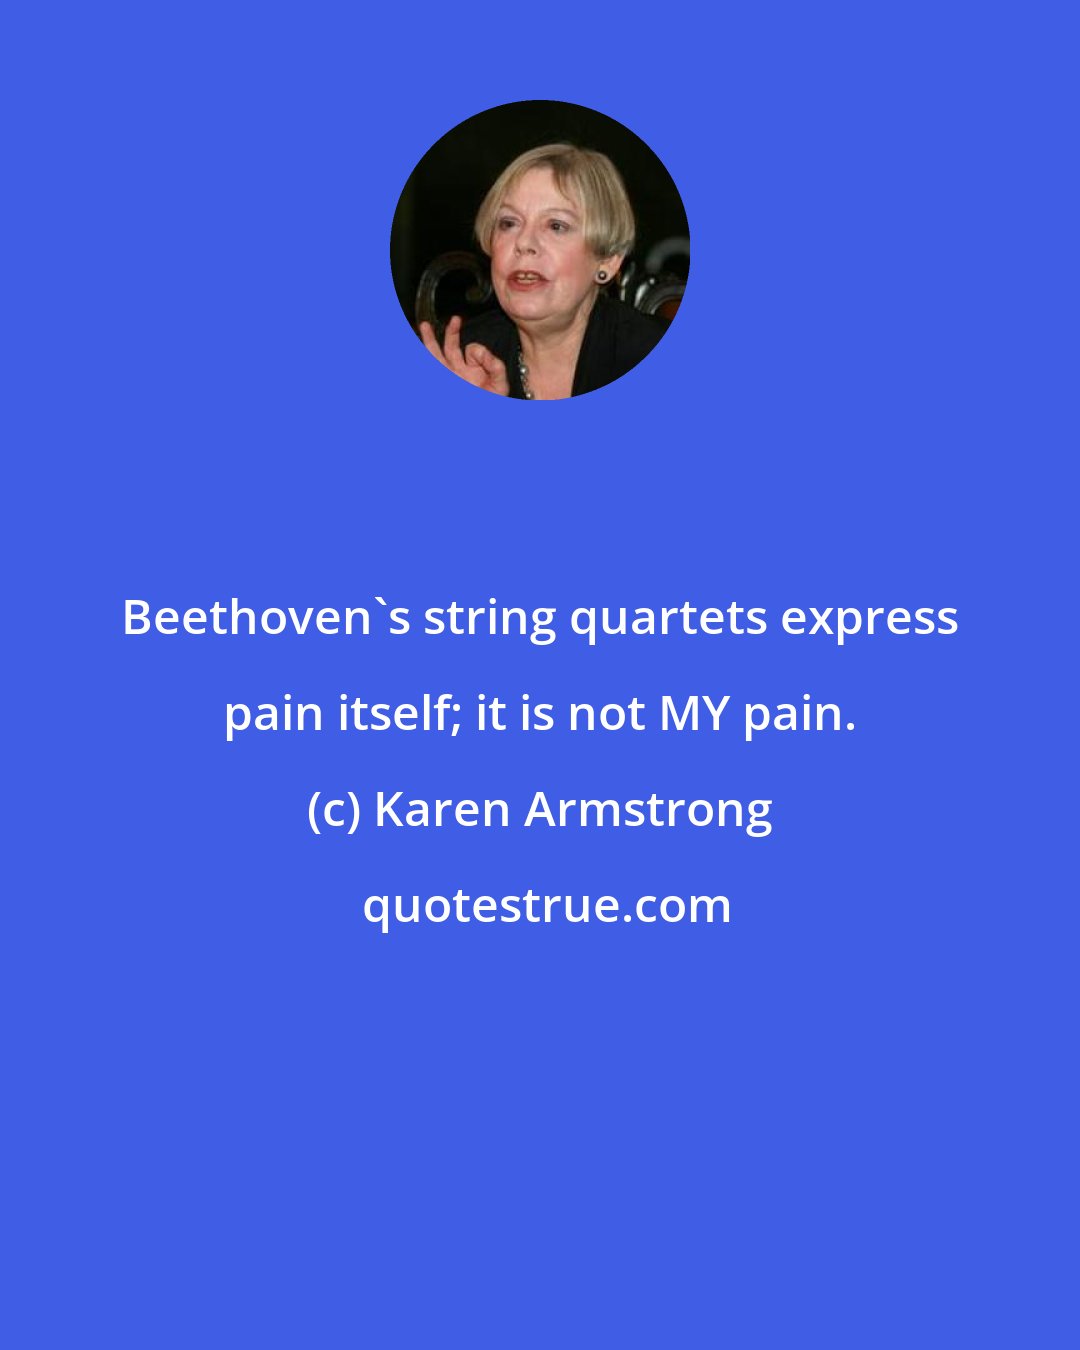 Karen Armstrong: Beethoven's string quartets express pain itself; it is not MY pain.